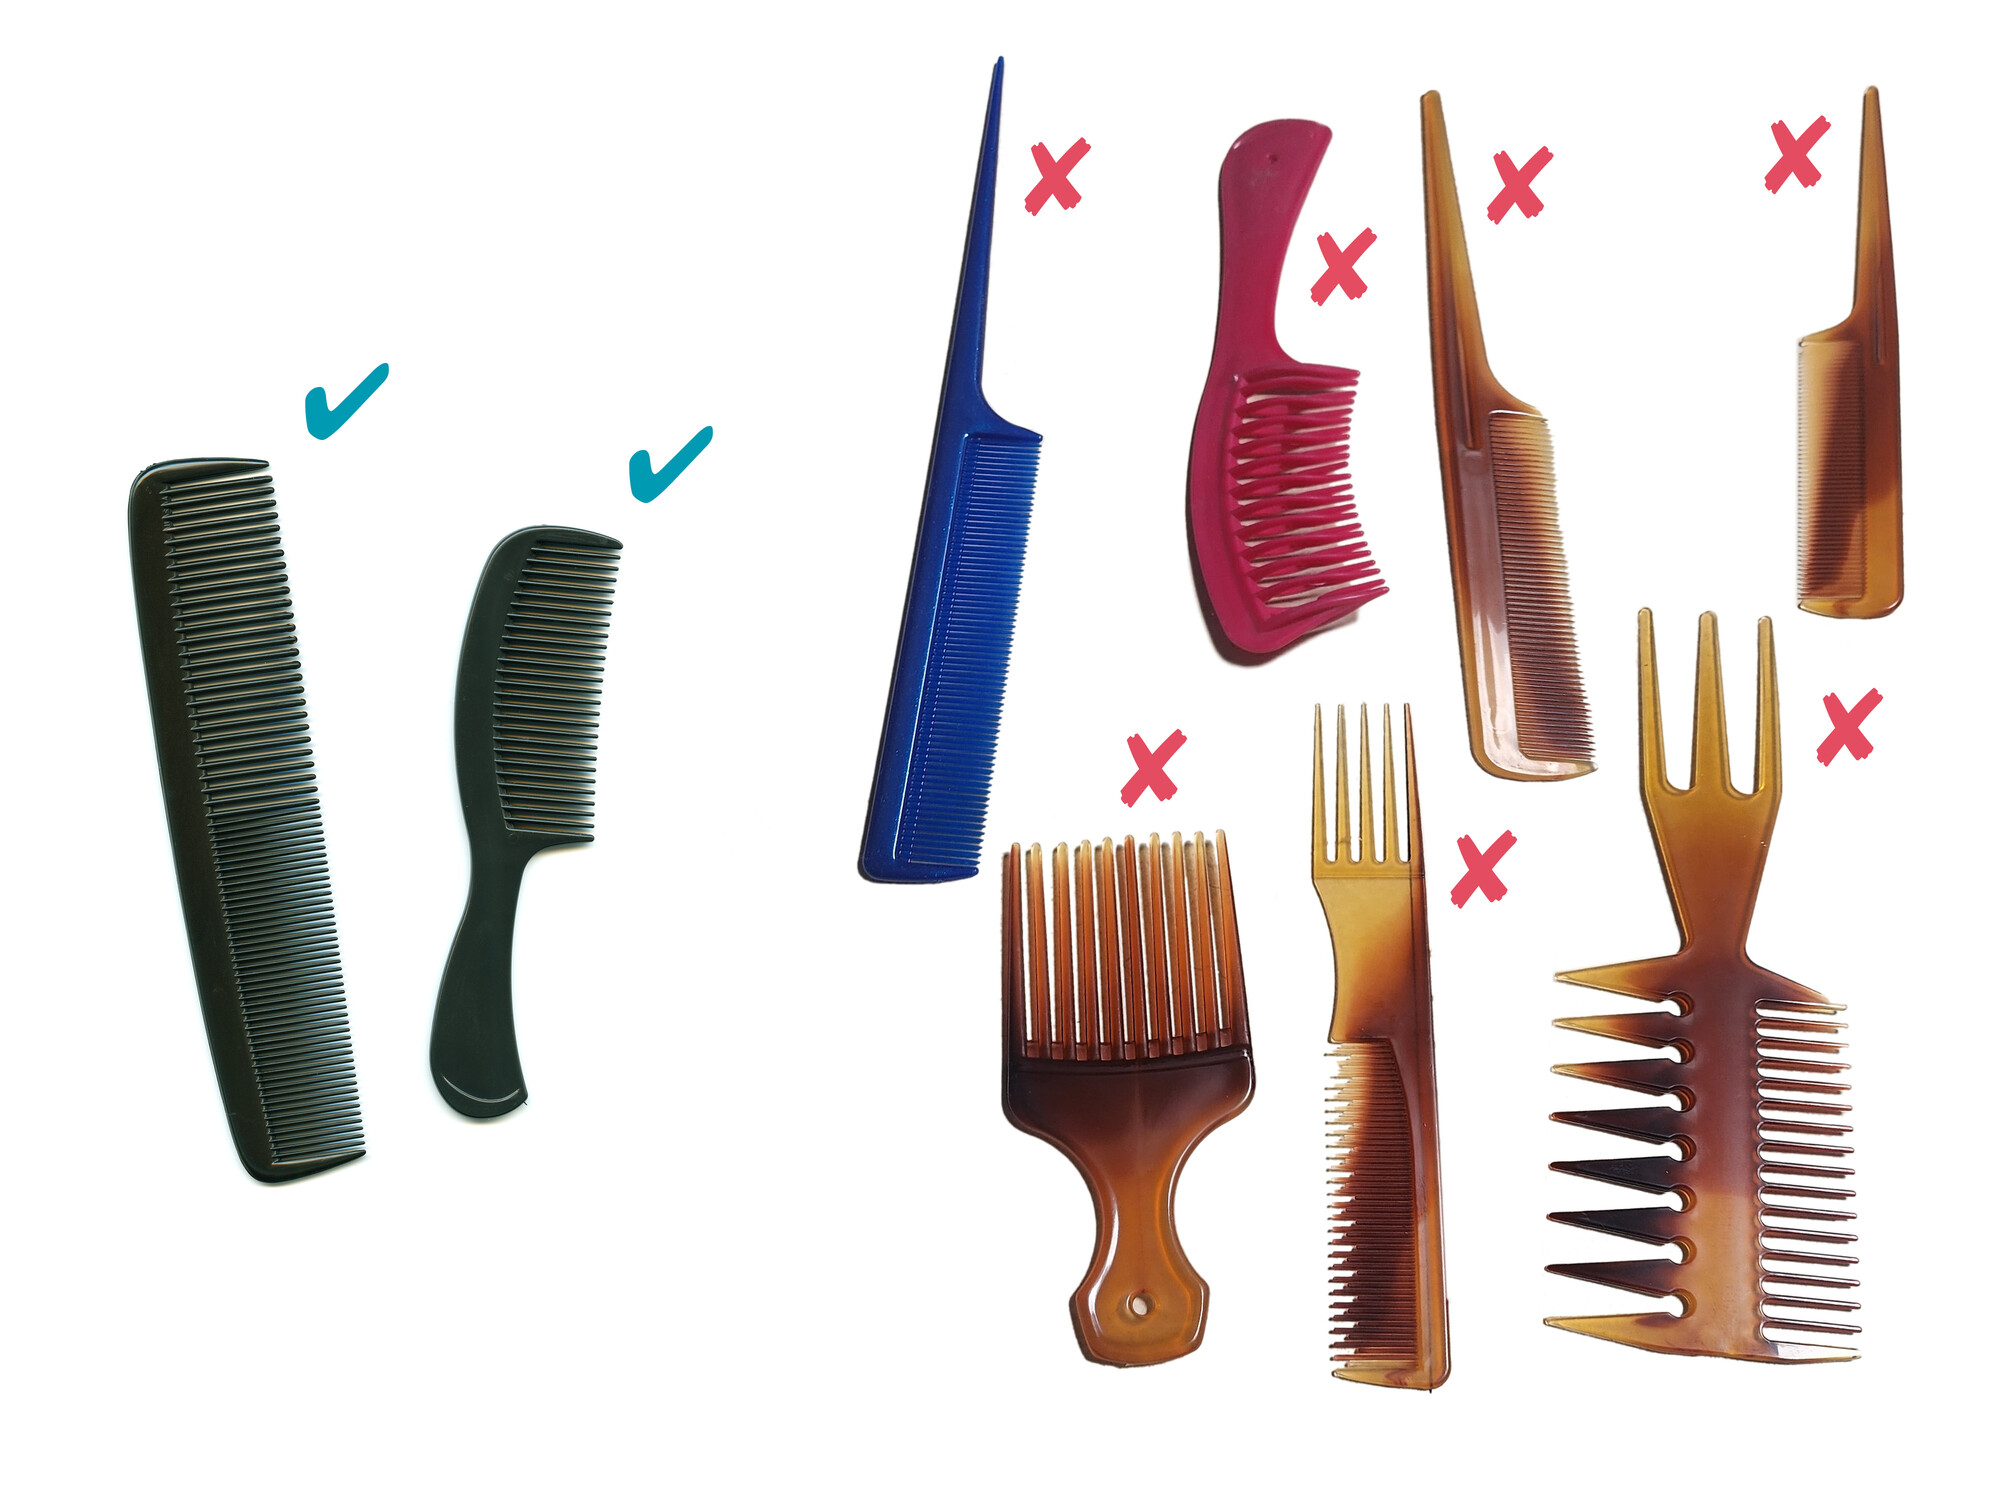 Examples of acceptable and unacceptable combs